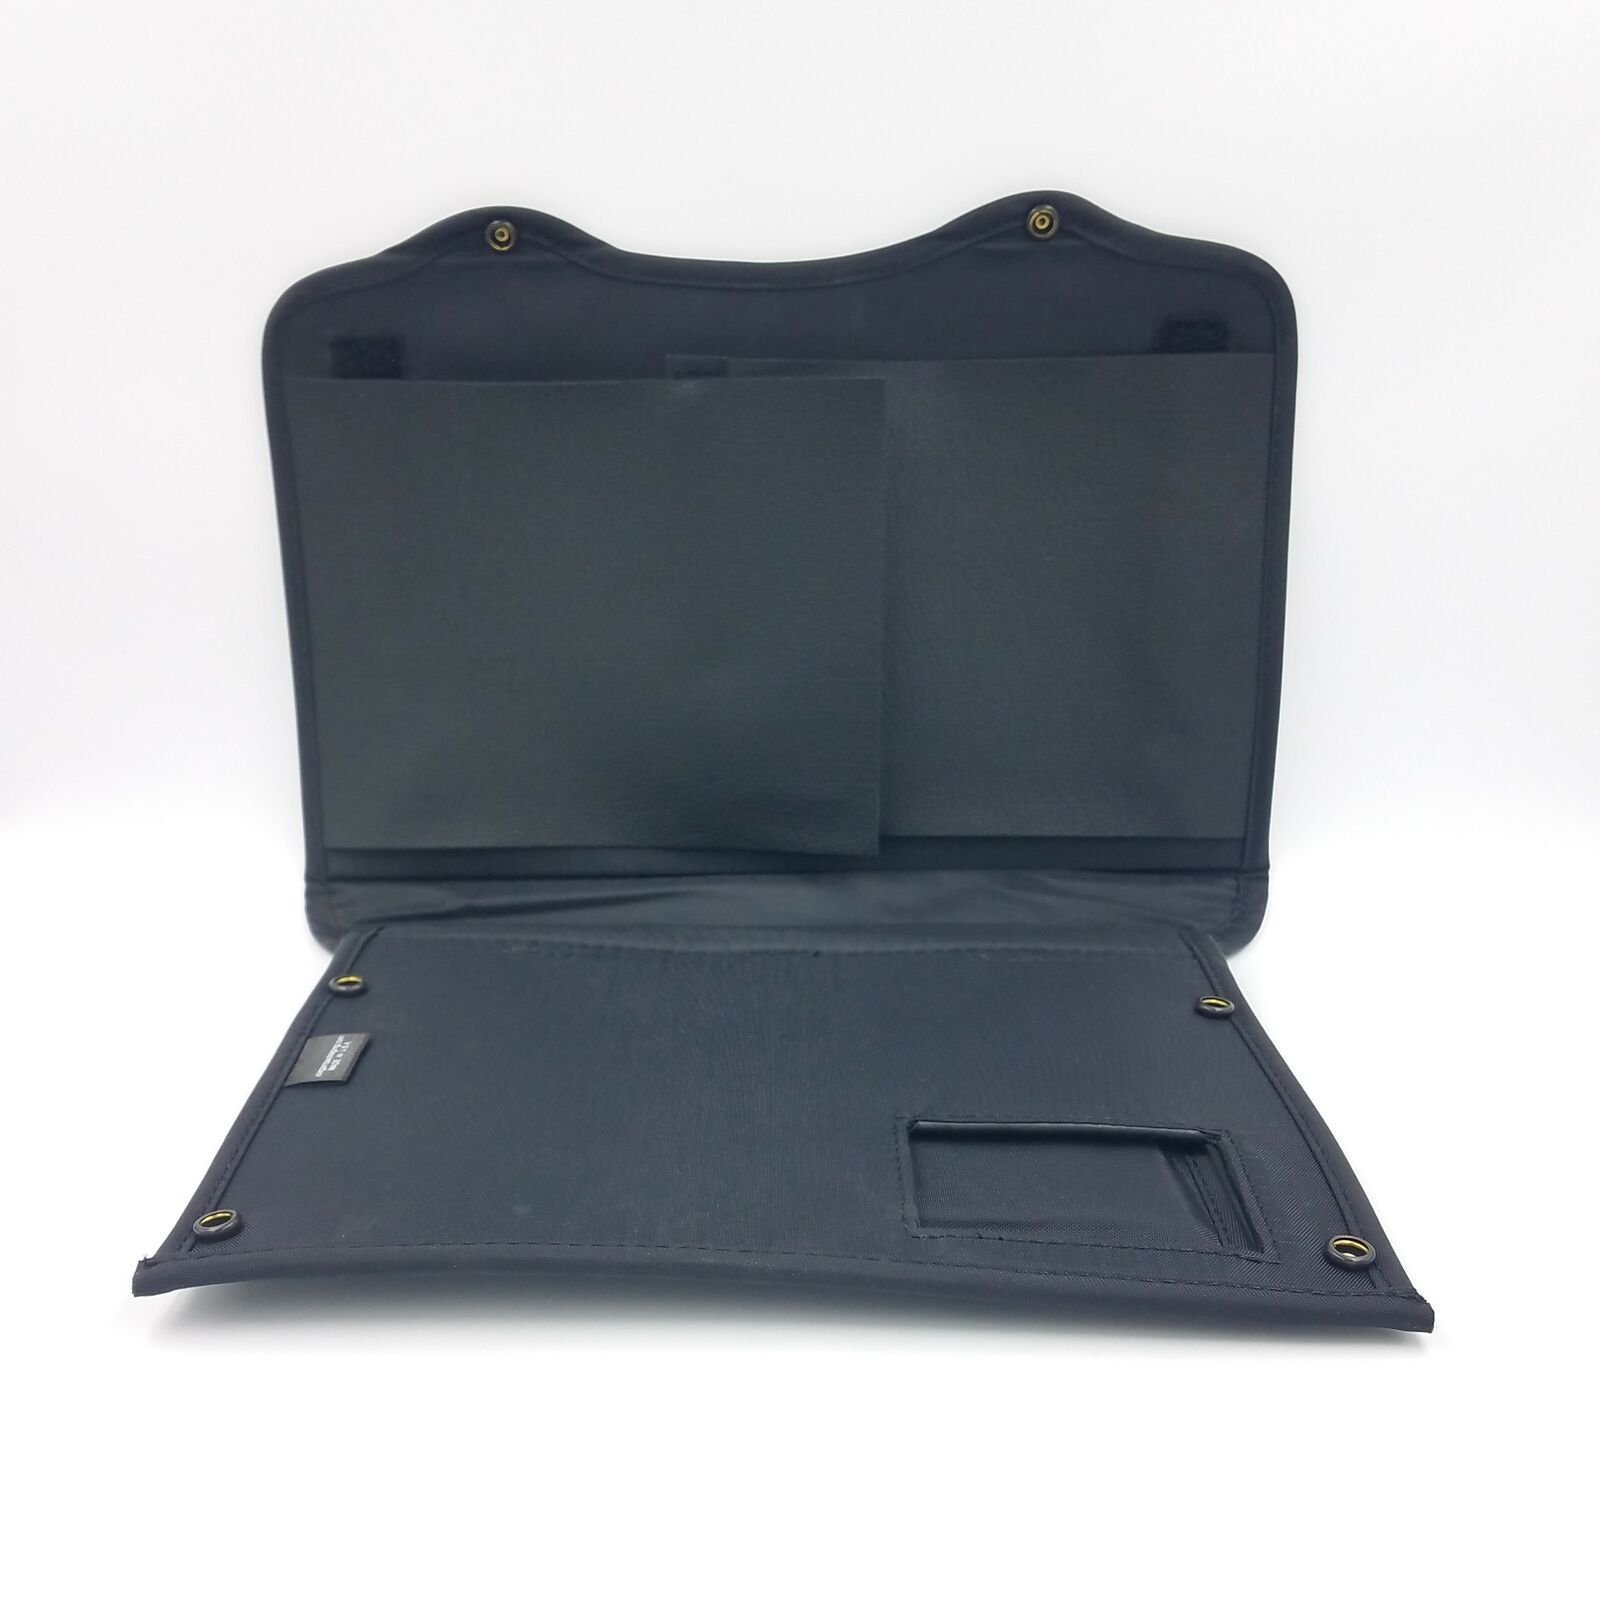 Xplore 11-16023 Carrying Case for Tablet PC